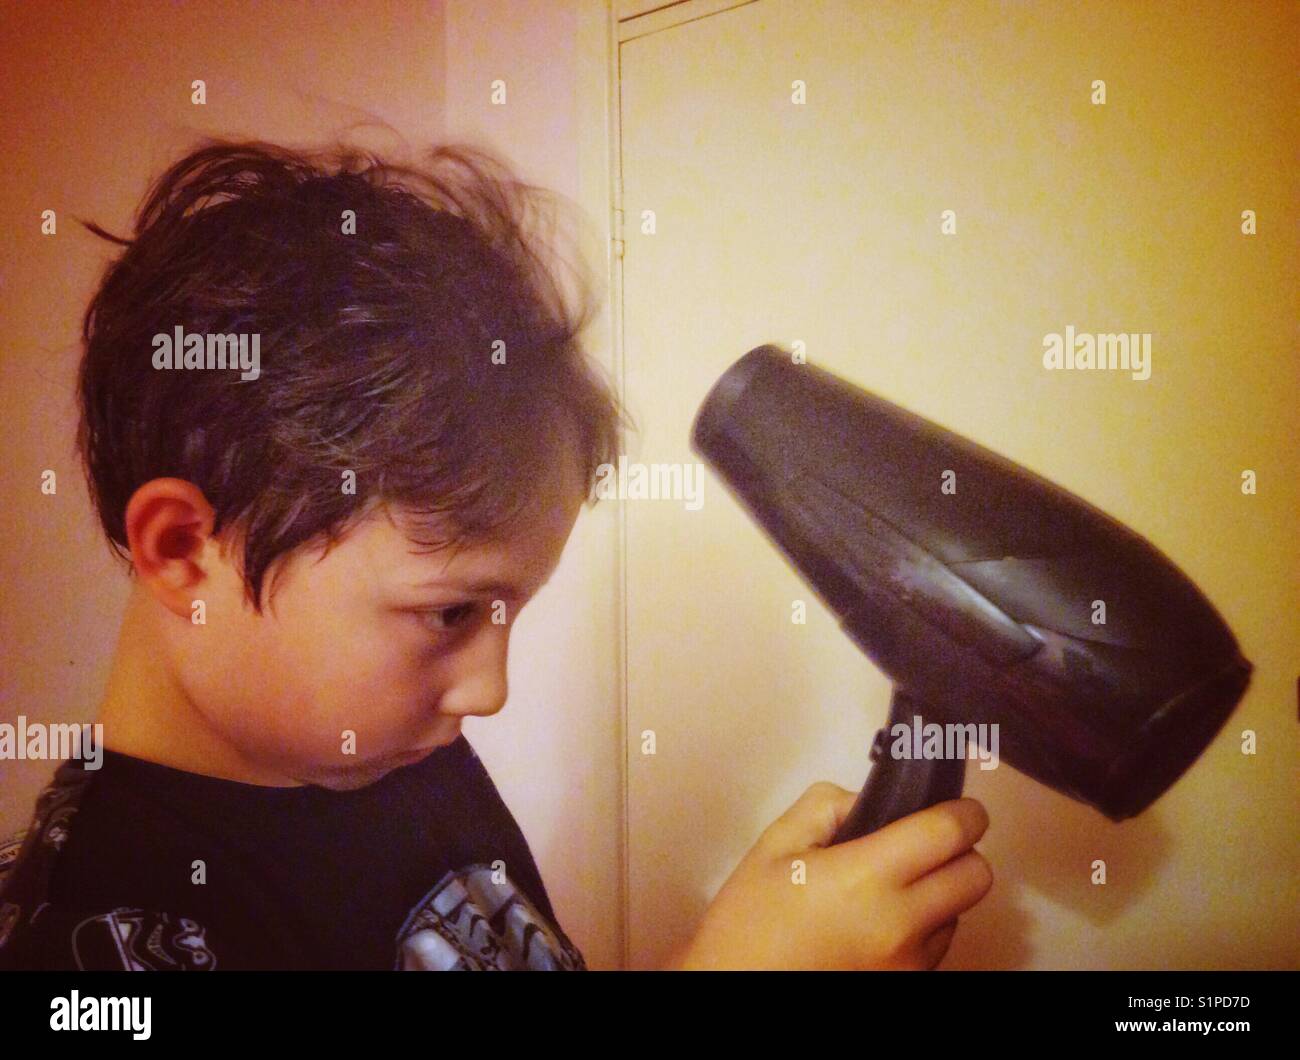 A young boy dries his hair with a hair dryer. Stock Photo